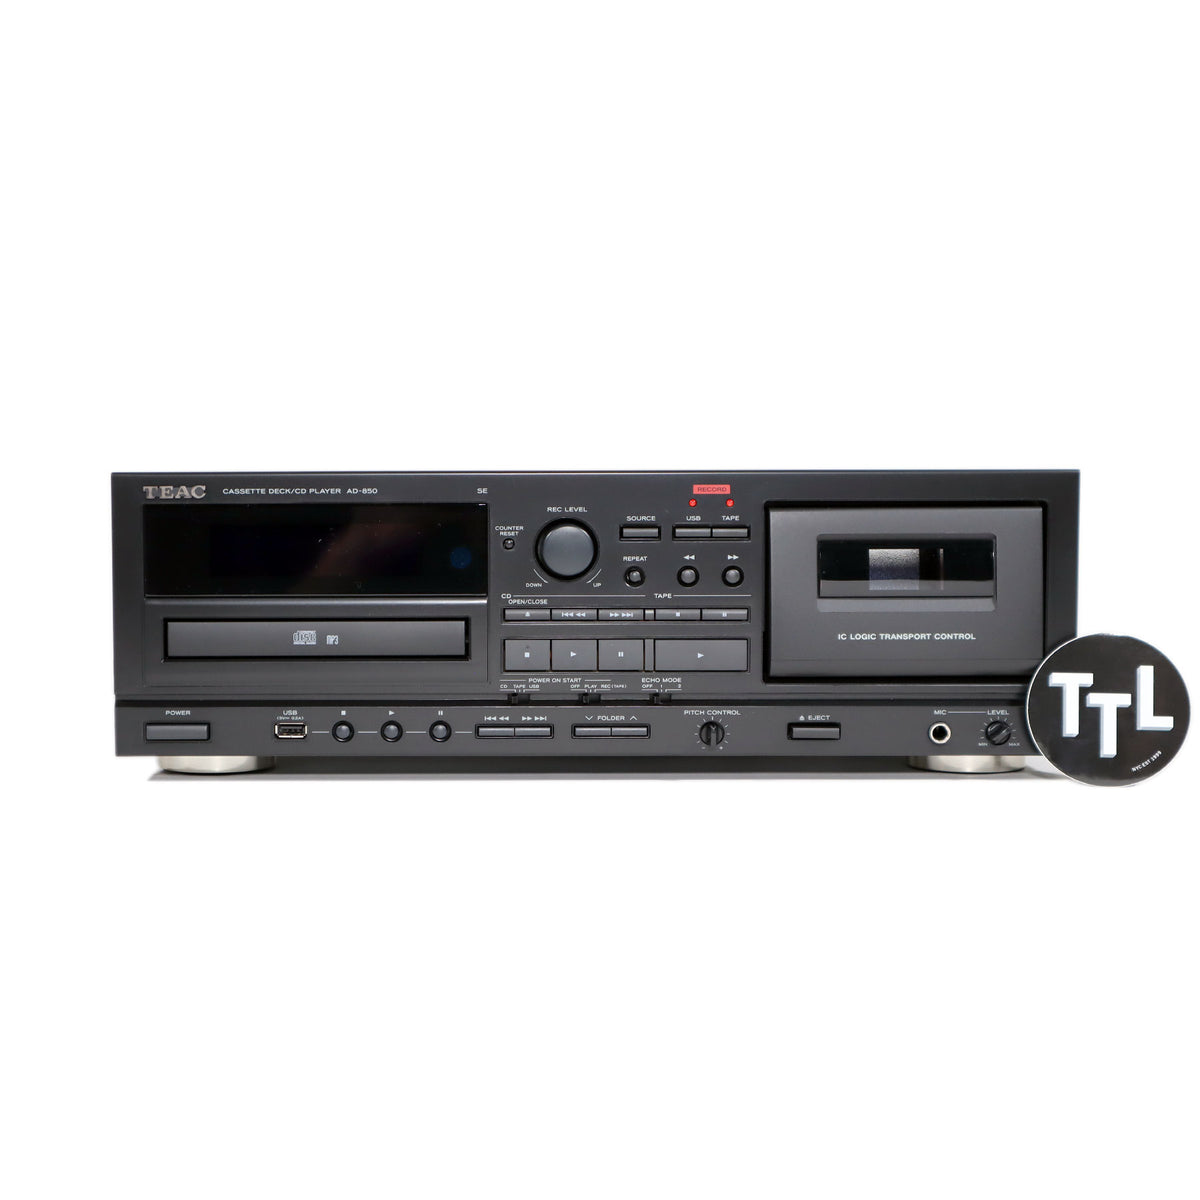 Teac: AD-850 Cassette Player / CD Player / USB Recorder 